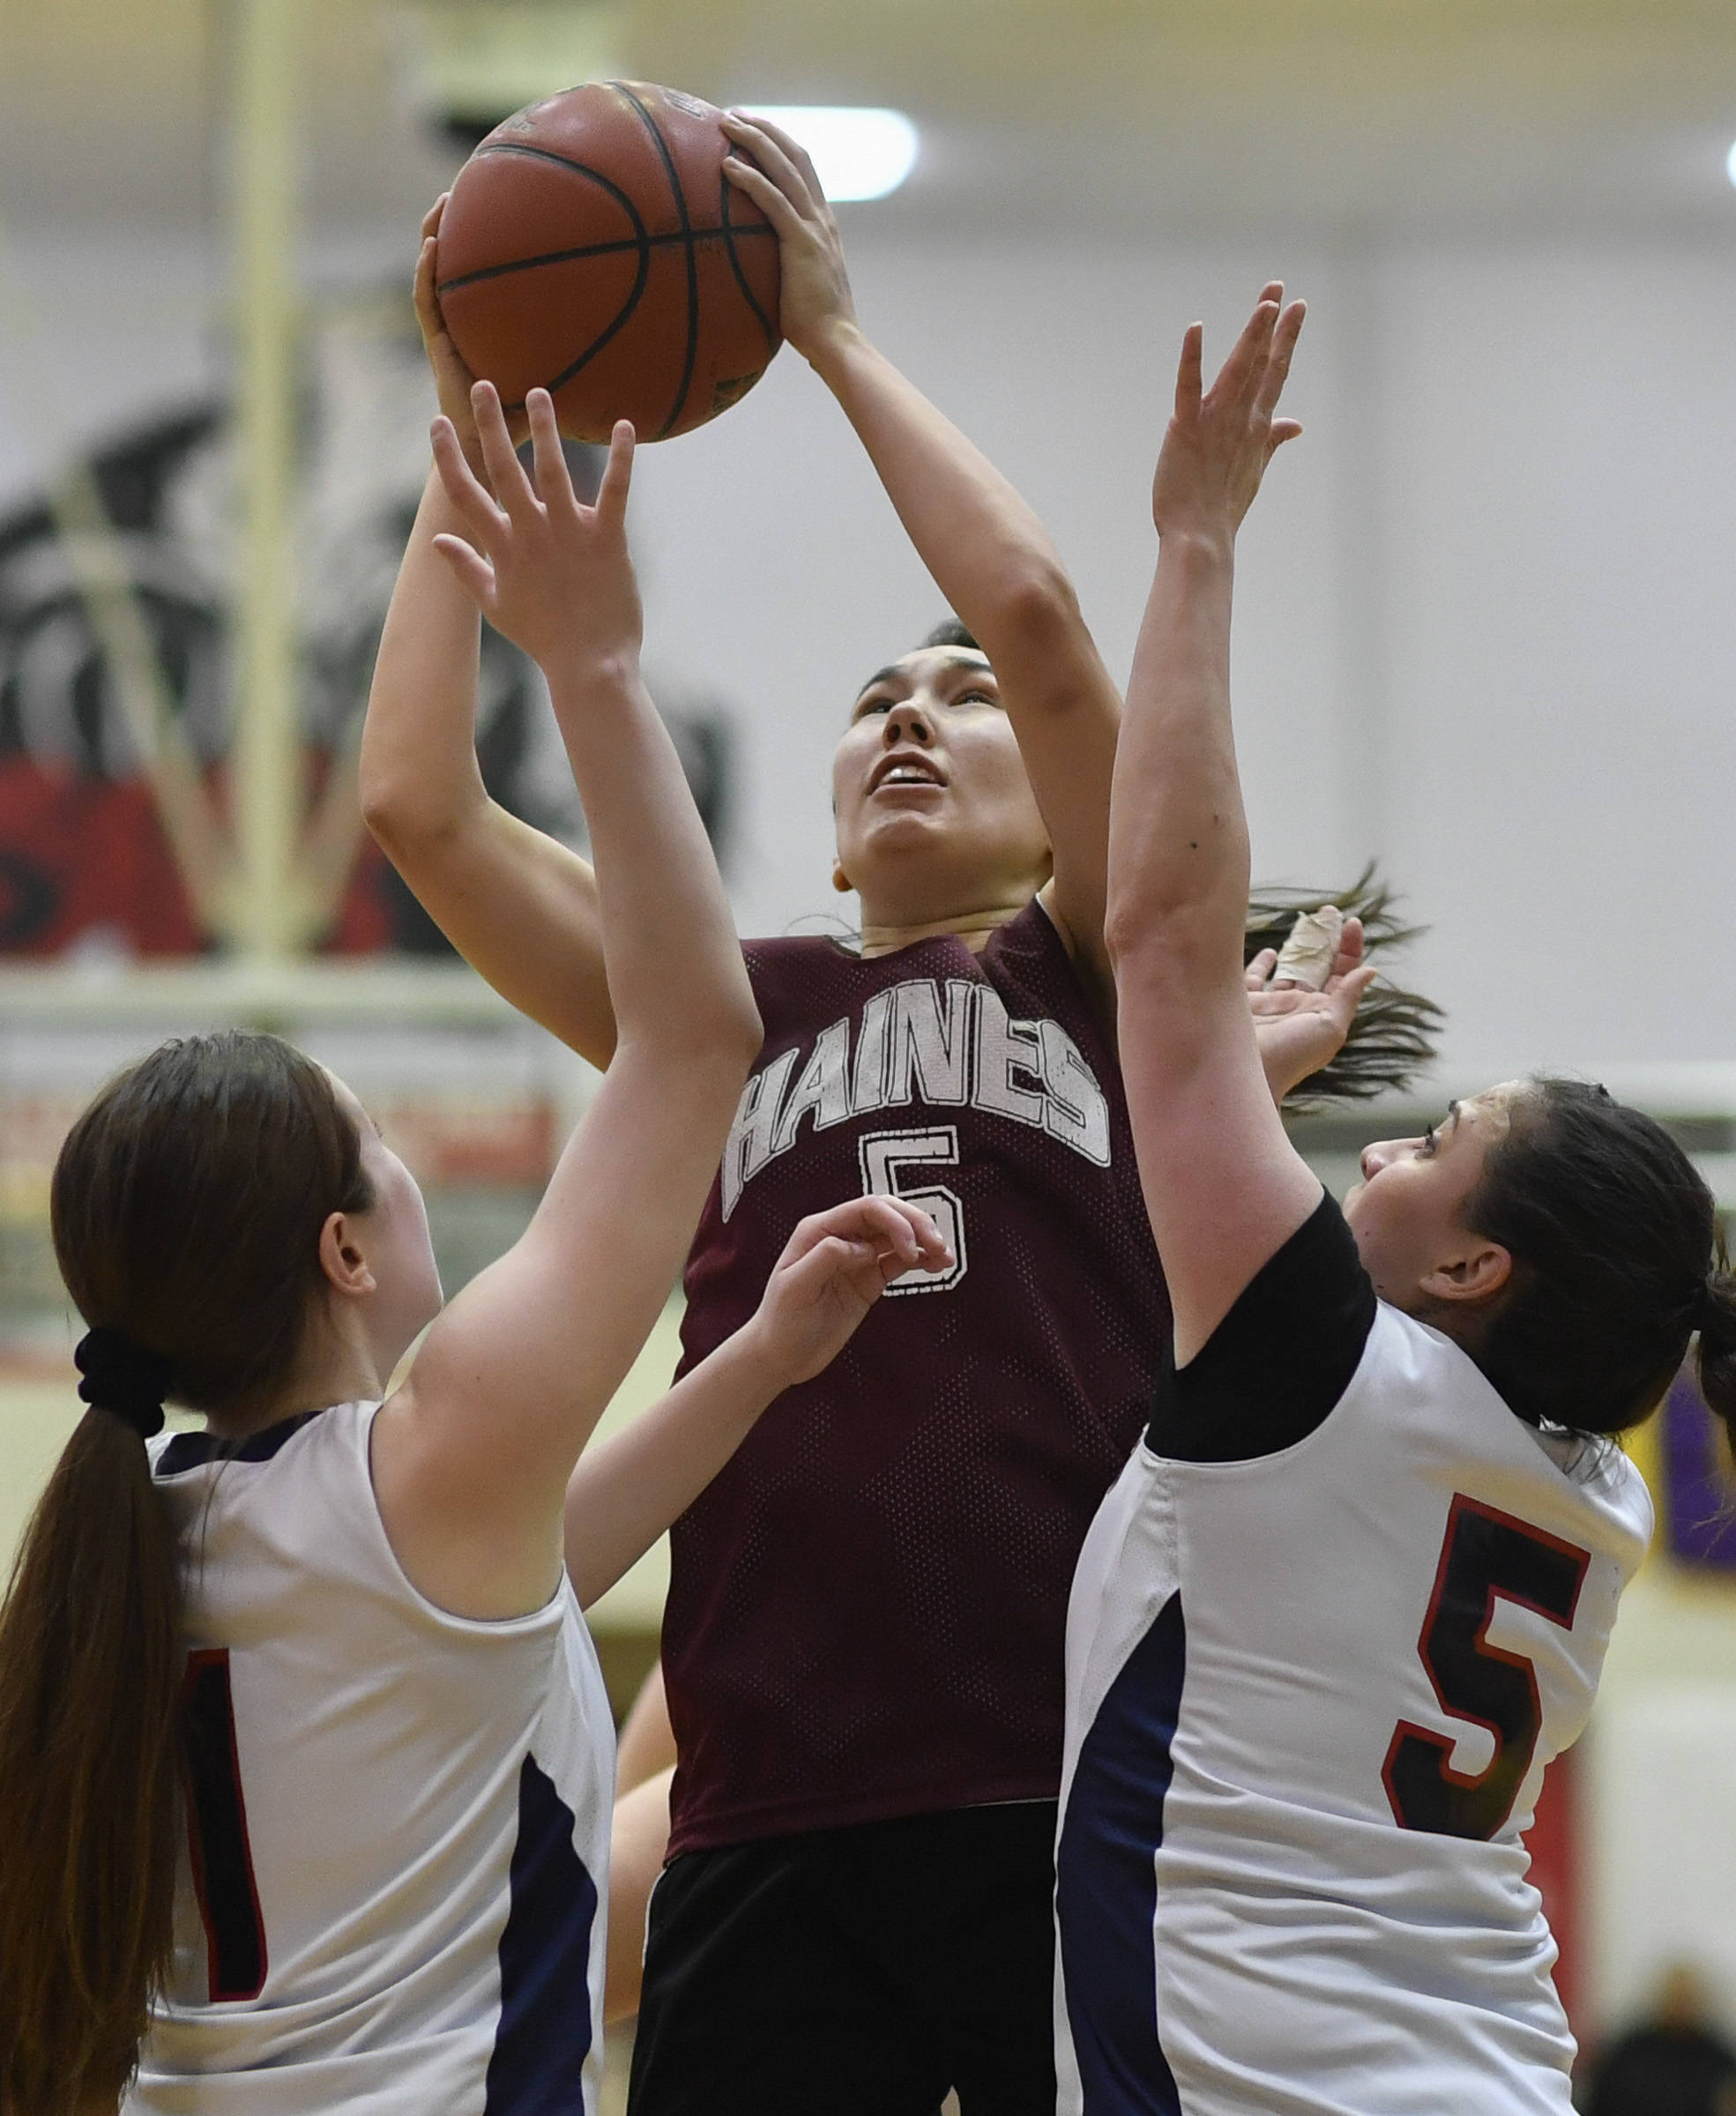 Haines’ Fran Daly, center, shoots over Yakutat’s Shaye Jensen, left, and Kim Buller during their women’s bracket game at the Juneau Lions Club 73rd Annual Gold Medal Basketball Tournament at Juneau-Douglas High School on Friday, March 22, 2019. Haines won 64-48. (Michael Penn | Juneau Empire)